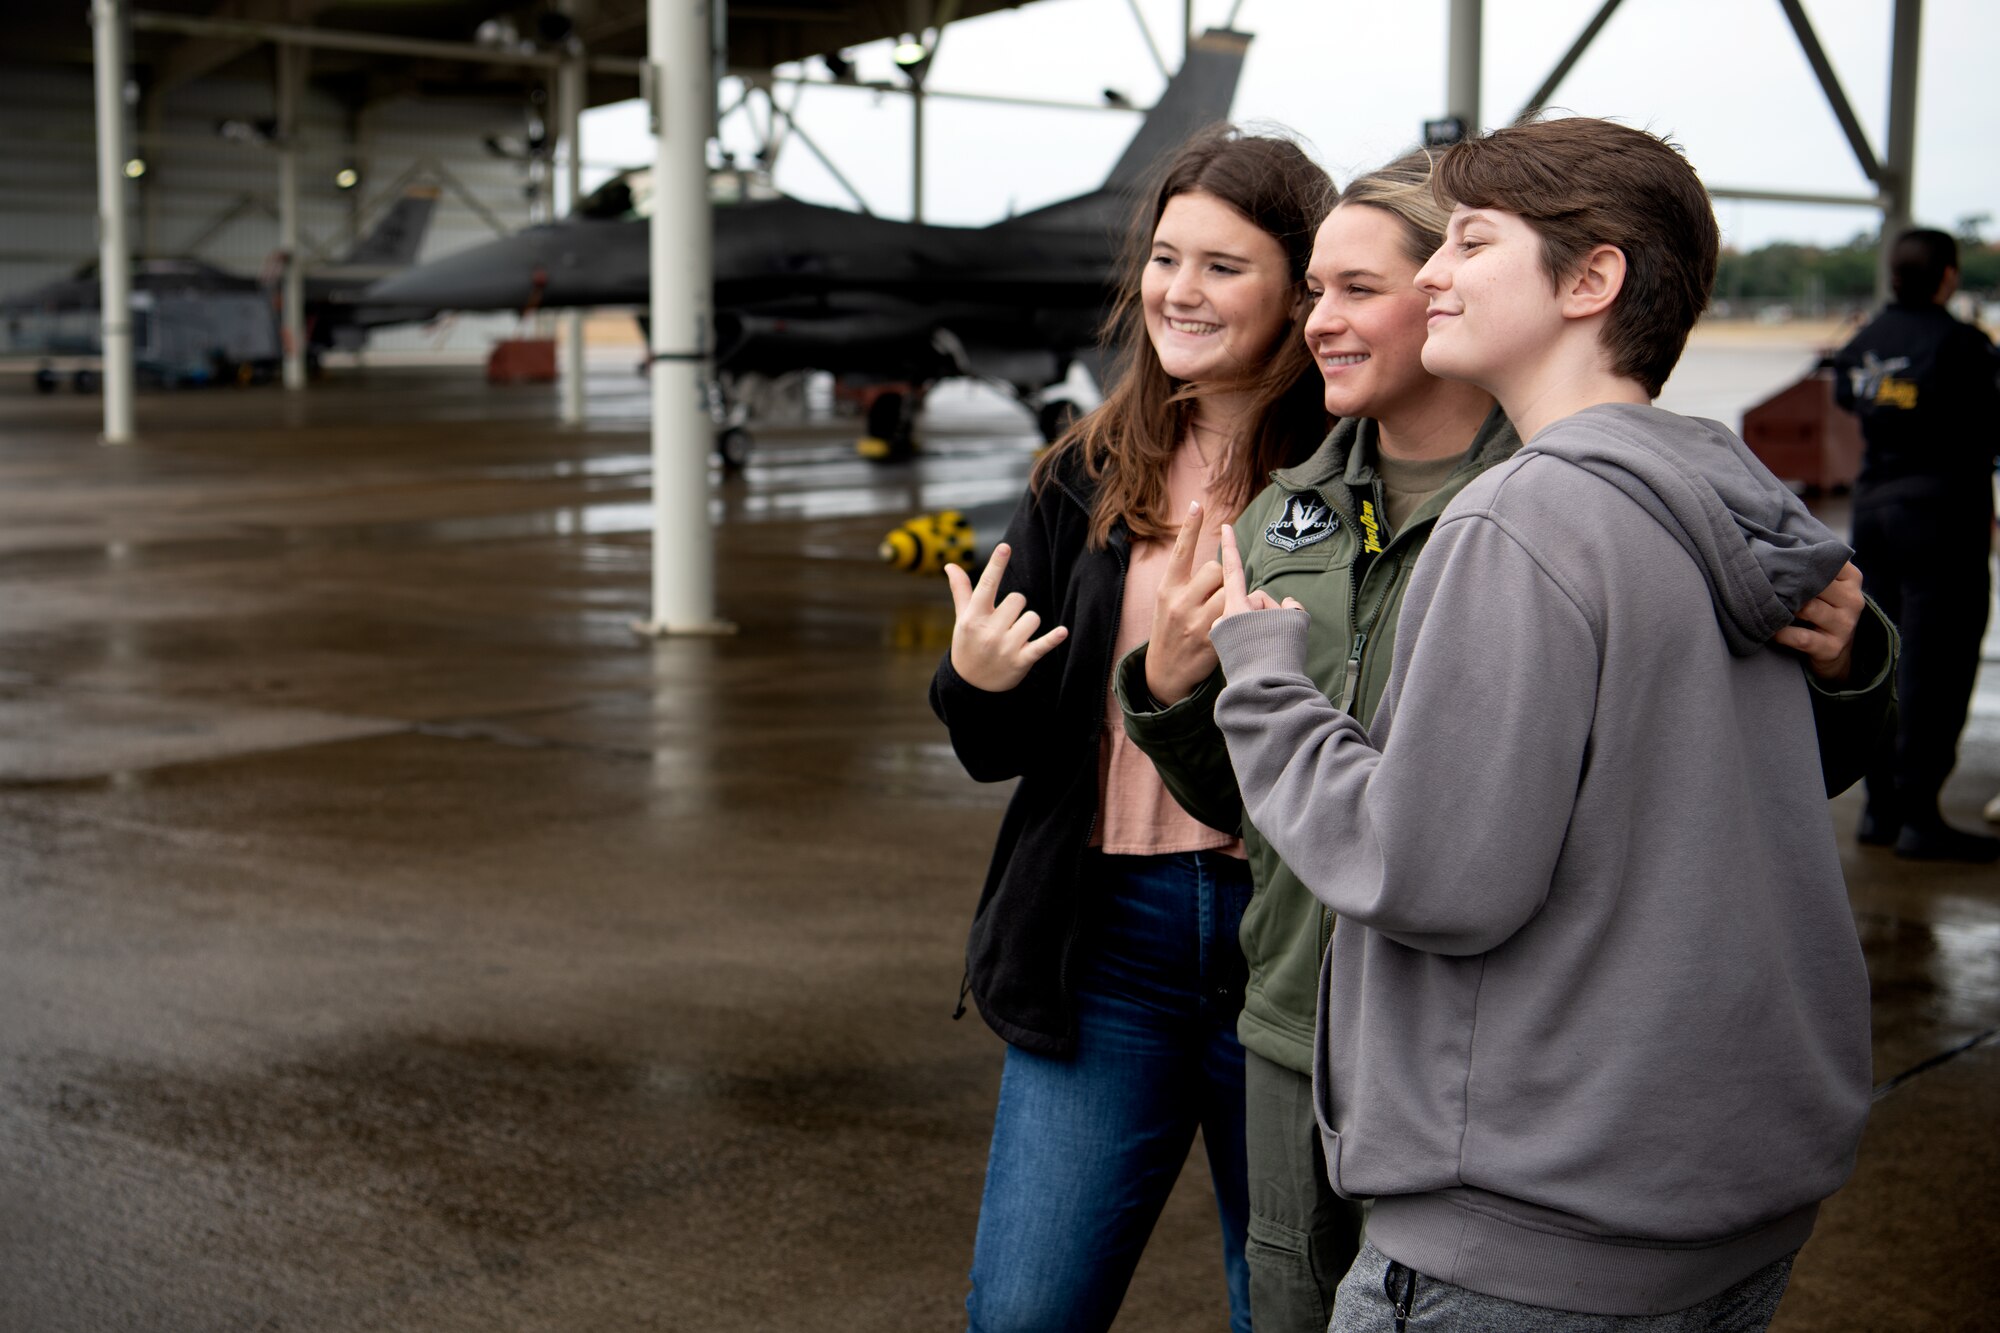 U.S. Air Force Capt. Aimee “Rebel” Fiedler, Air Combat Command F-16 Viper Demonstration Team commander, poses for a photo with two Florence 1 School District’s Advantage Academy students at Shaw Air Force Base, S.C., Nov. 30, 2022. Units from Ninth Air Force (Air Forces Central), 15th Air Force and the 20th Fighter Wing worked together to host an engagement for 35 local high school students as part of Project Quesada. The new Air Combat Command-led program is designed to attract and recruit talented students seeking careers in aviation, science, technology, engineering and math in an effort to develop future aviators and leaders. (U.S. Air Force photo by Staff Sgt. Kelsey Owen)